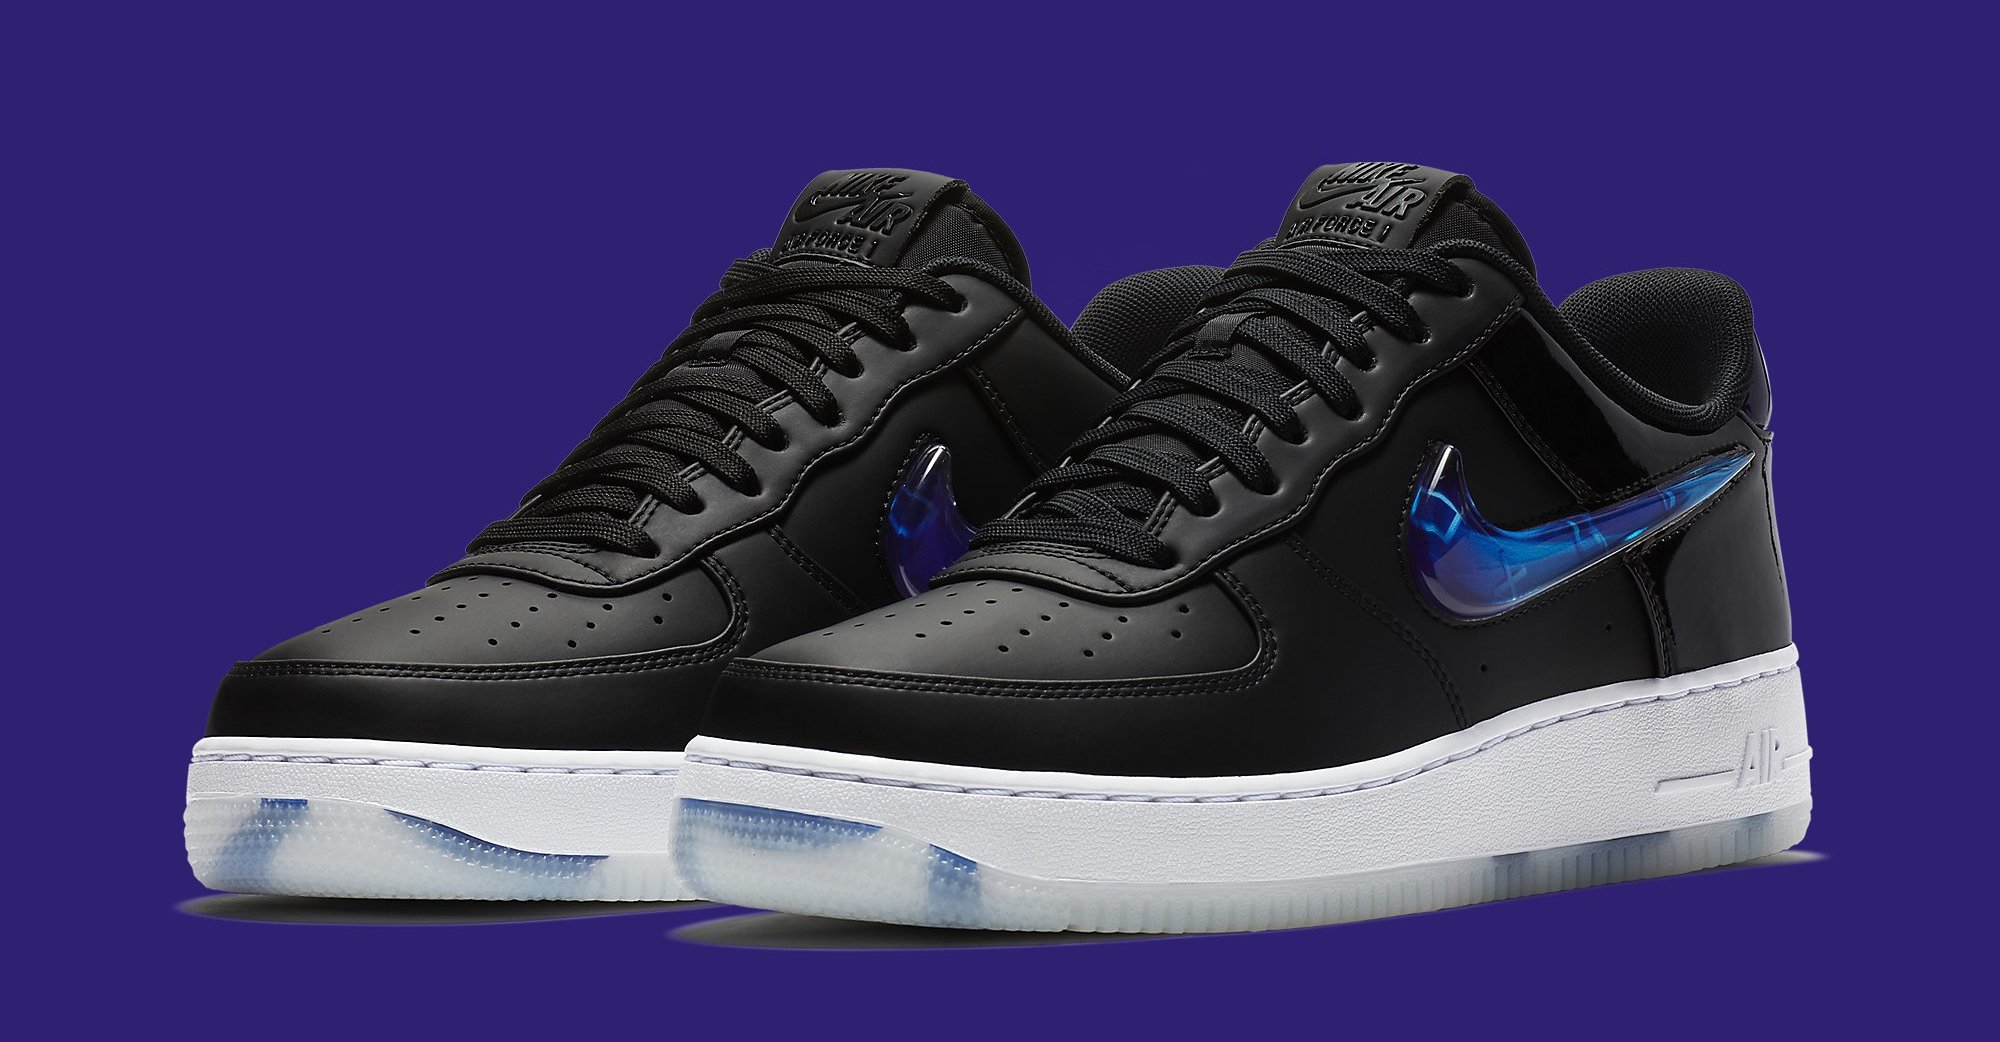 Playstation x Nike Air Force 1s Expected to Release Today |